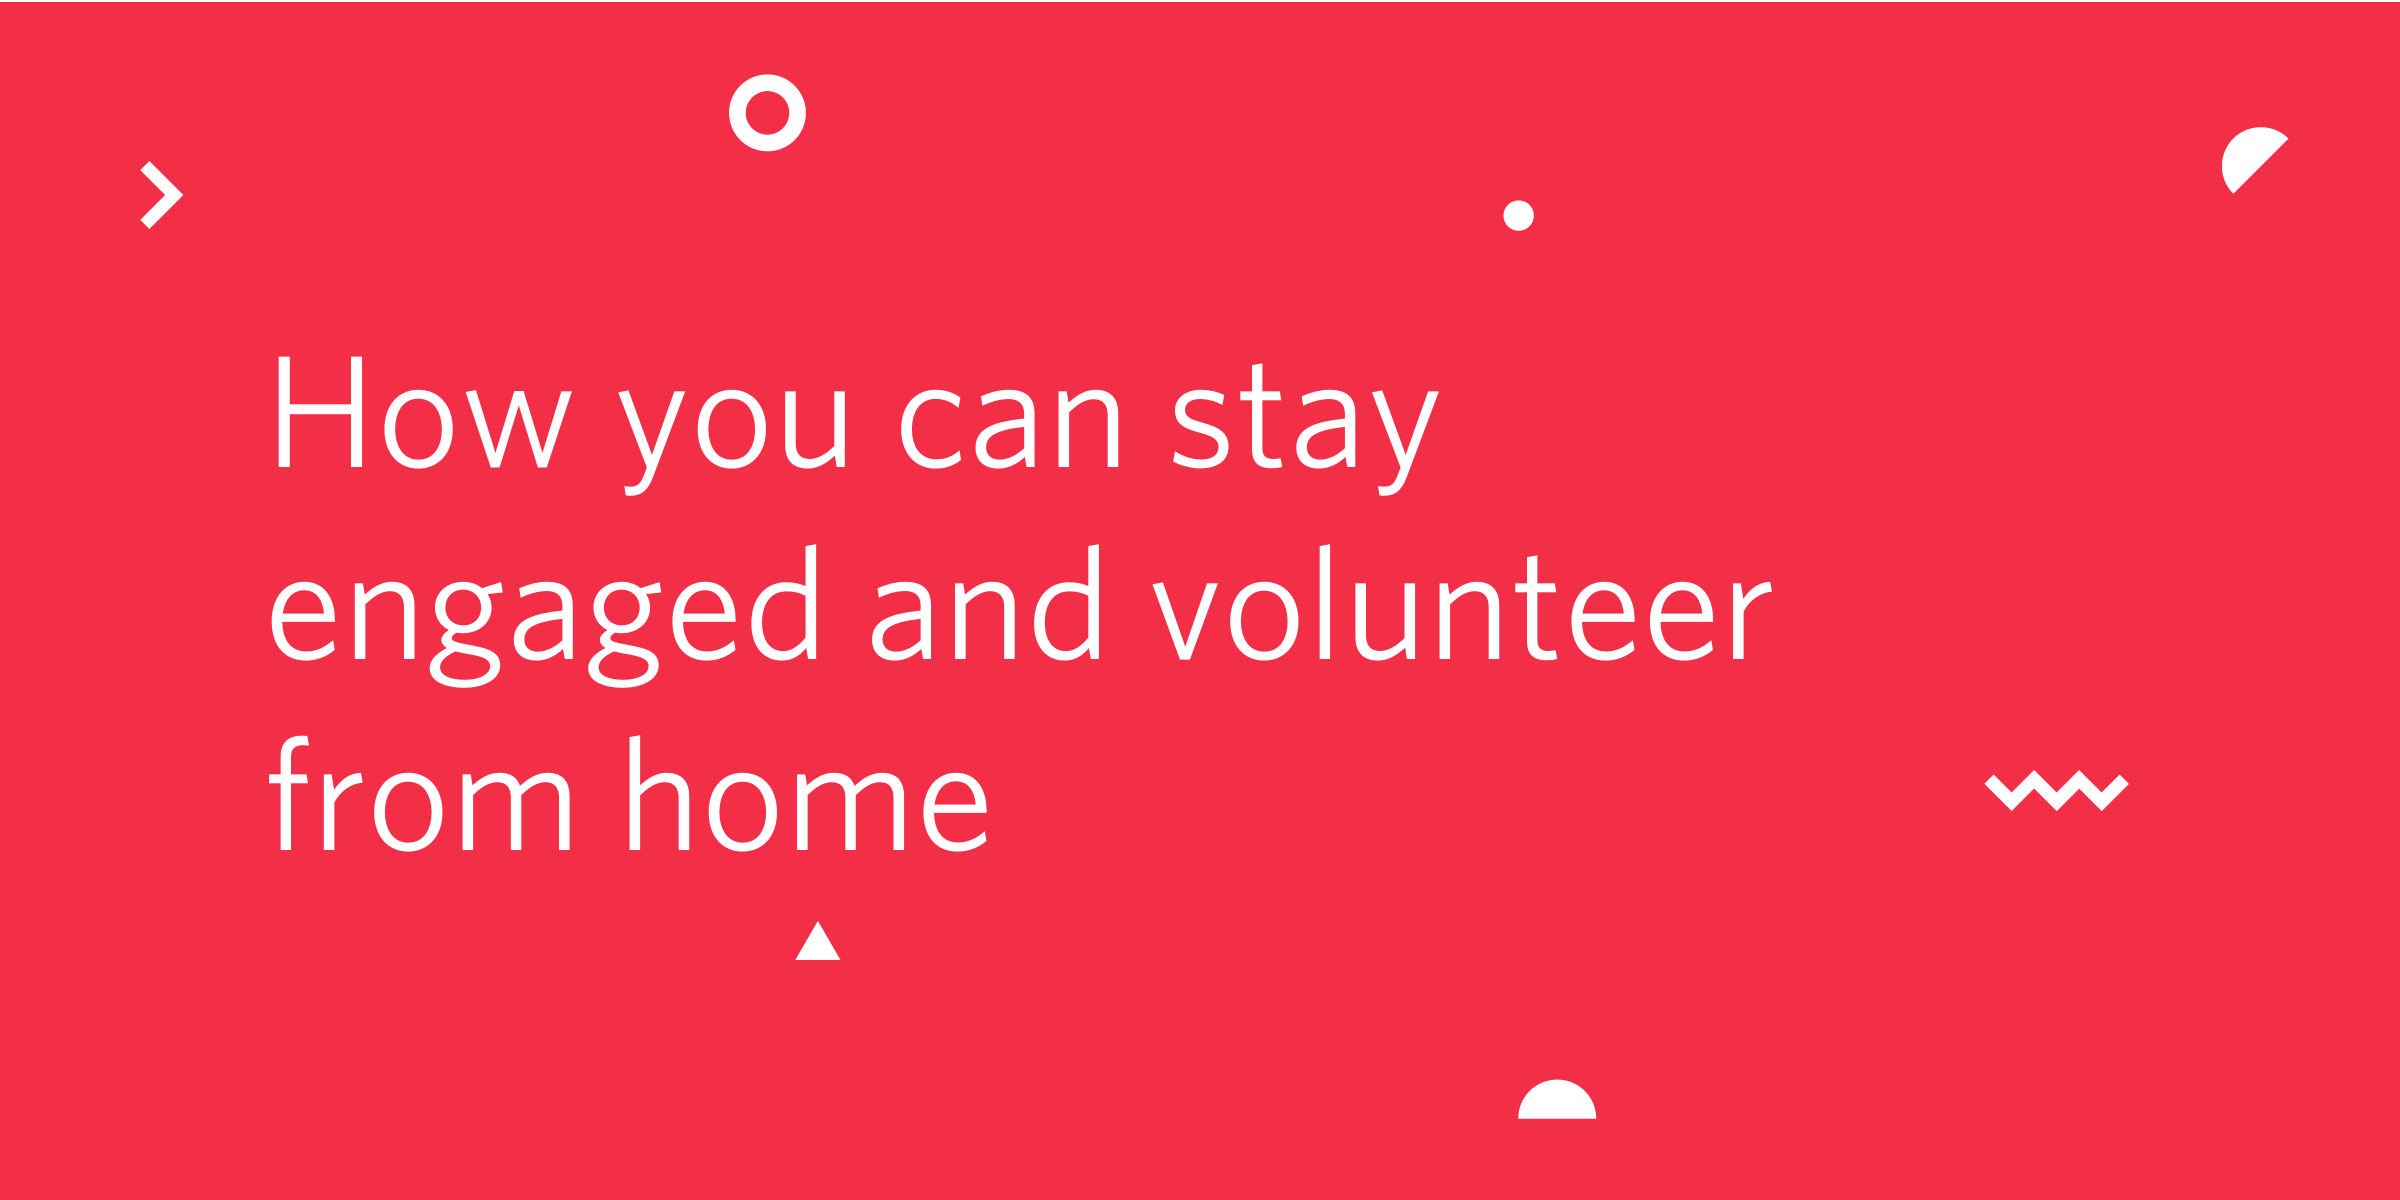 Stay engaged and volunteer from home